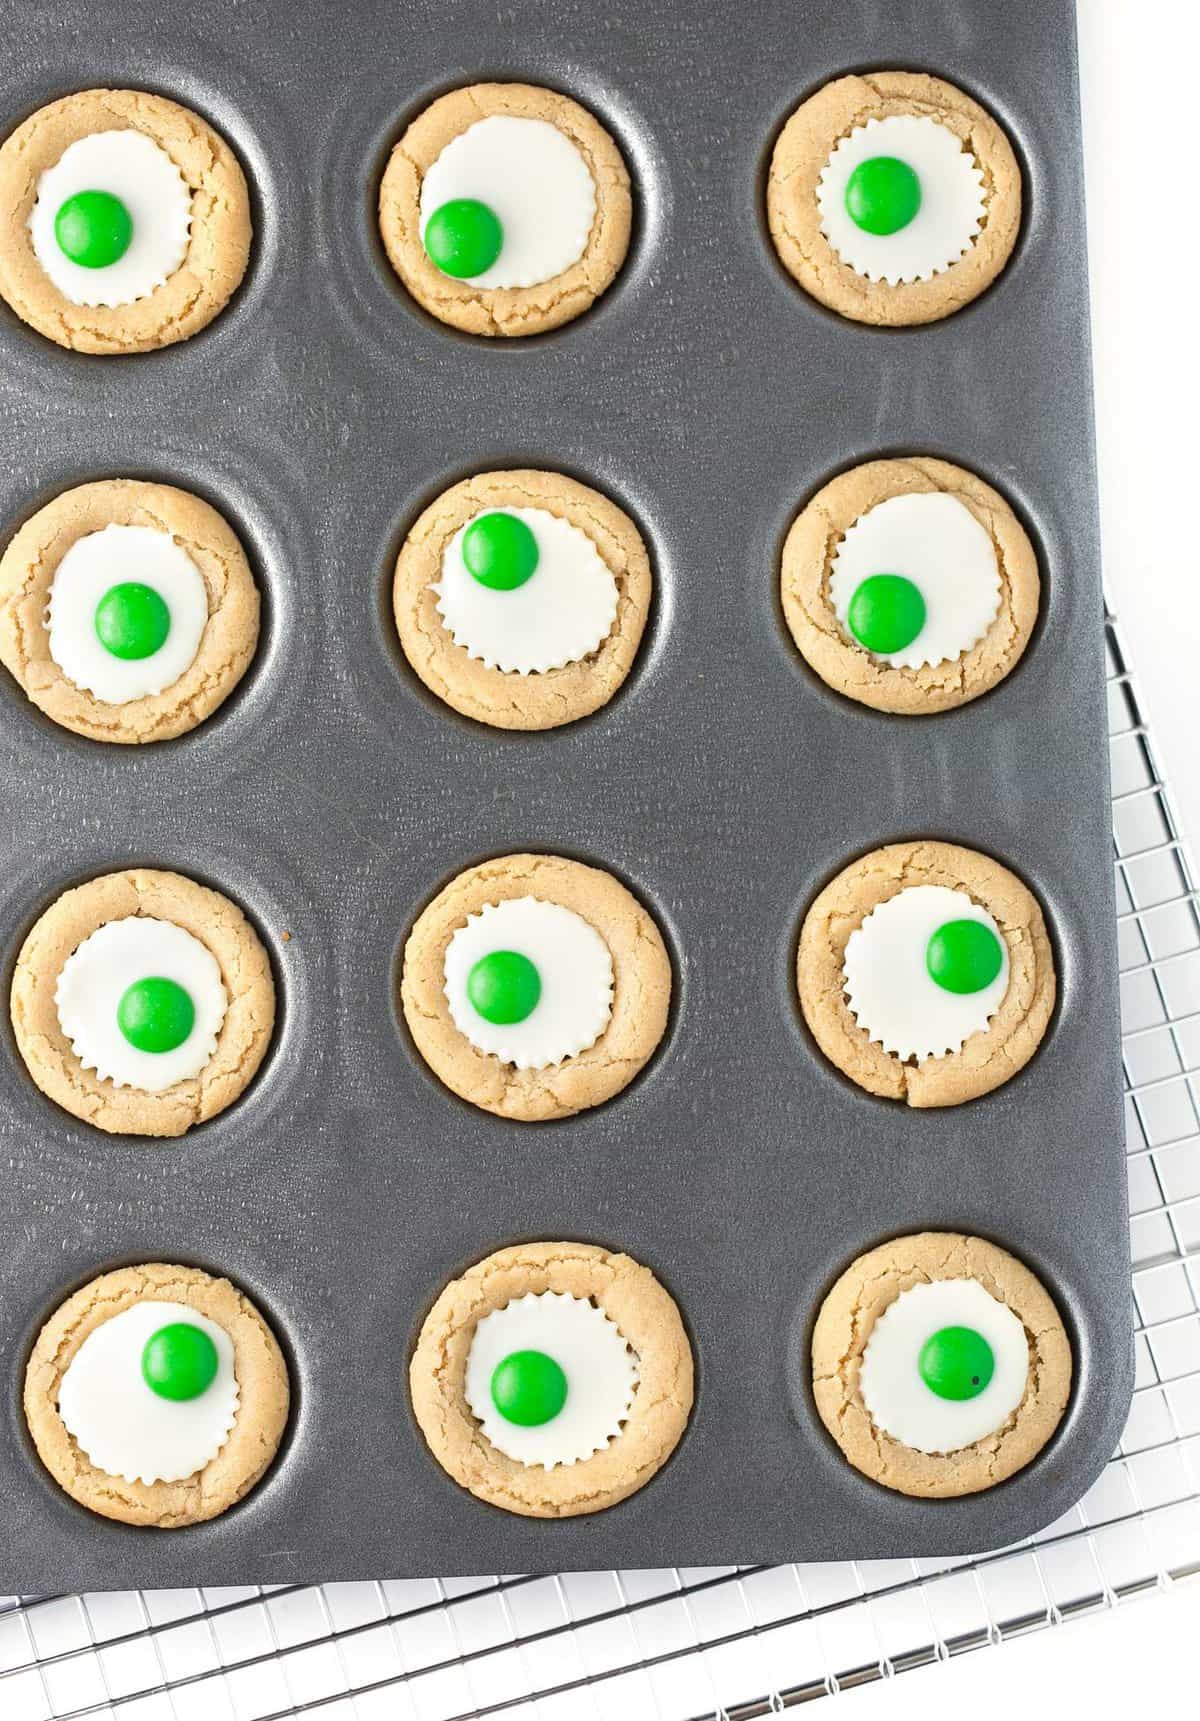 Overhead photo of mini muffin tin with white chocolate peanut butter cup cookies with green M&M's in the center to look like Halloween eyeballs.